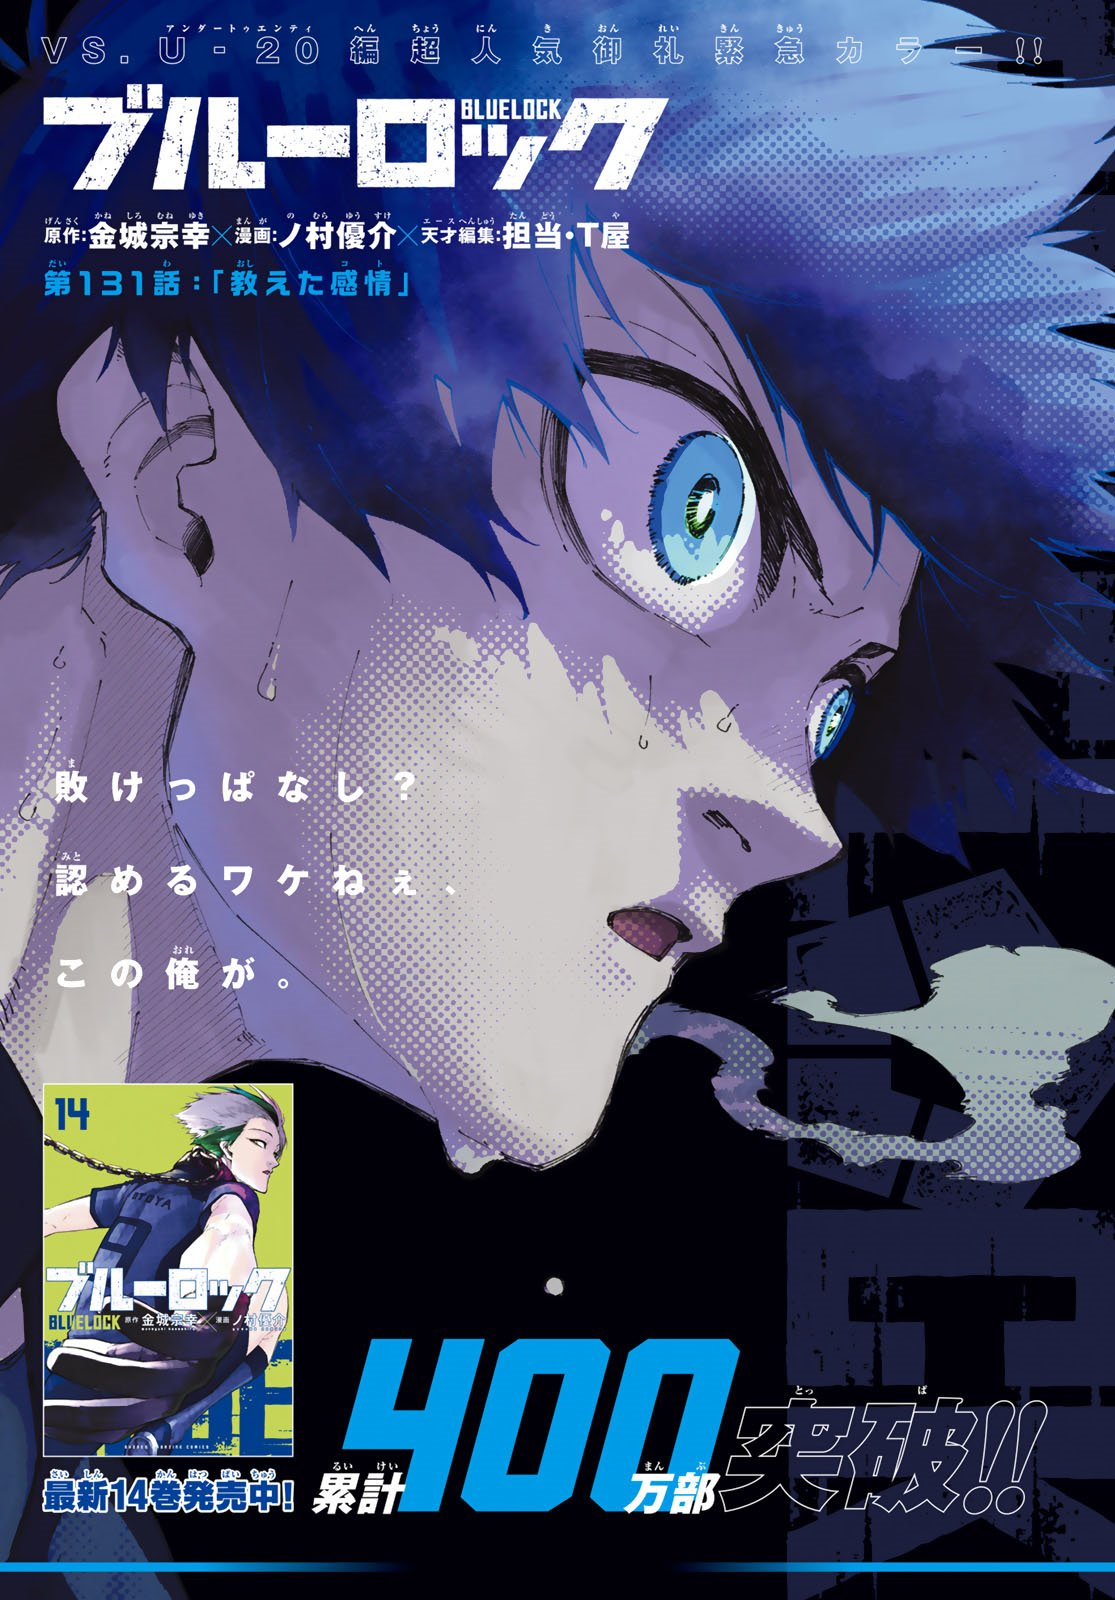 Blue Lock chapter 239 spoilers and raw scans: Isagi continues to partner  with Hiori